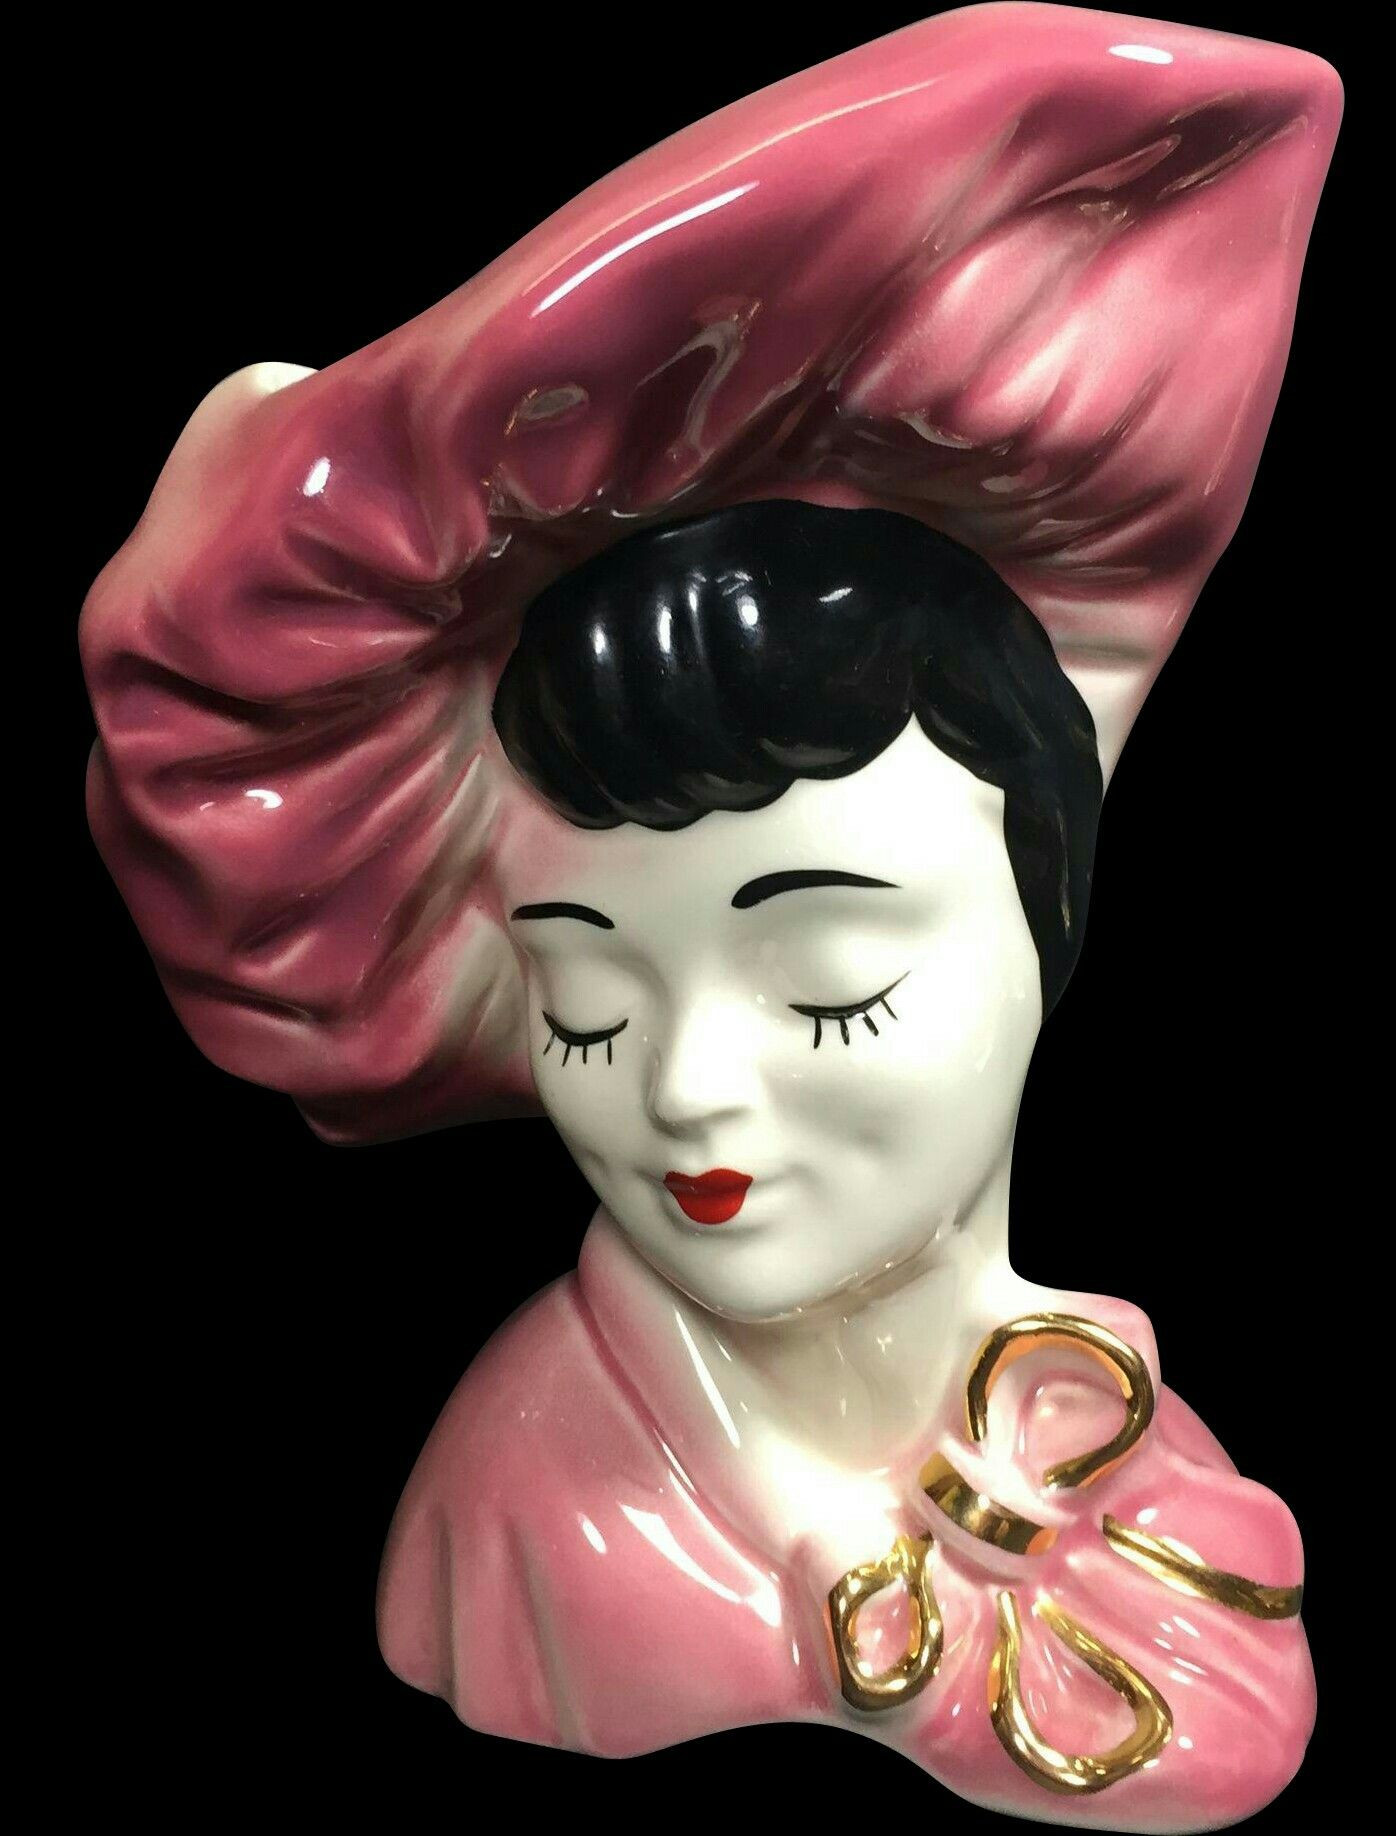 14 Fashionable Cameo Girl Head Vases Sale 2022 free download cameo girl head vases sale of pin by isabel tauste on lady head vases pinterest for vases inarco head vase